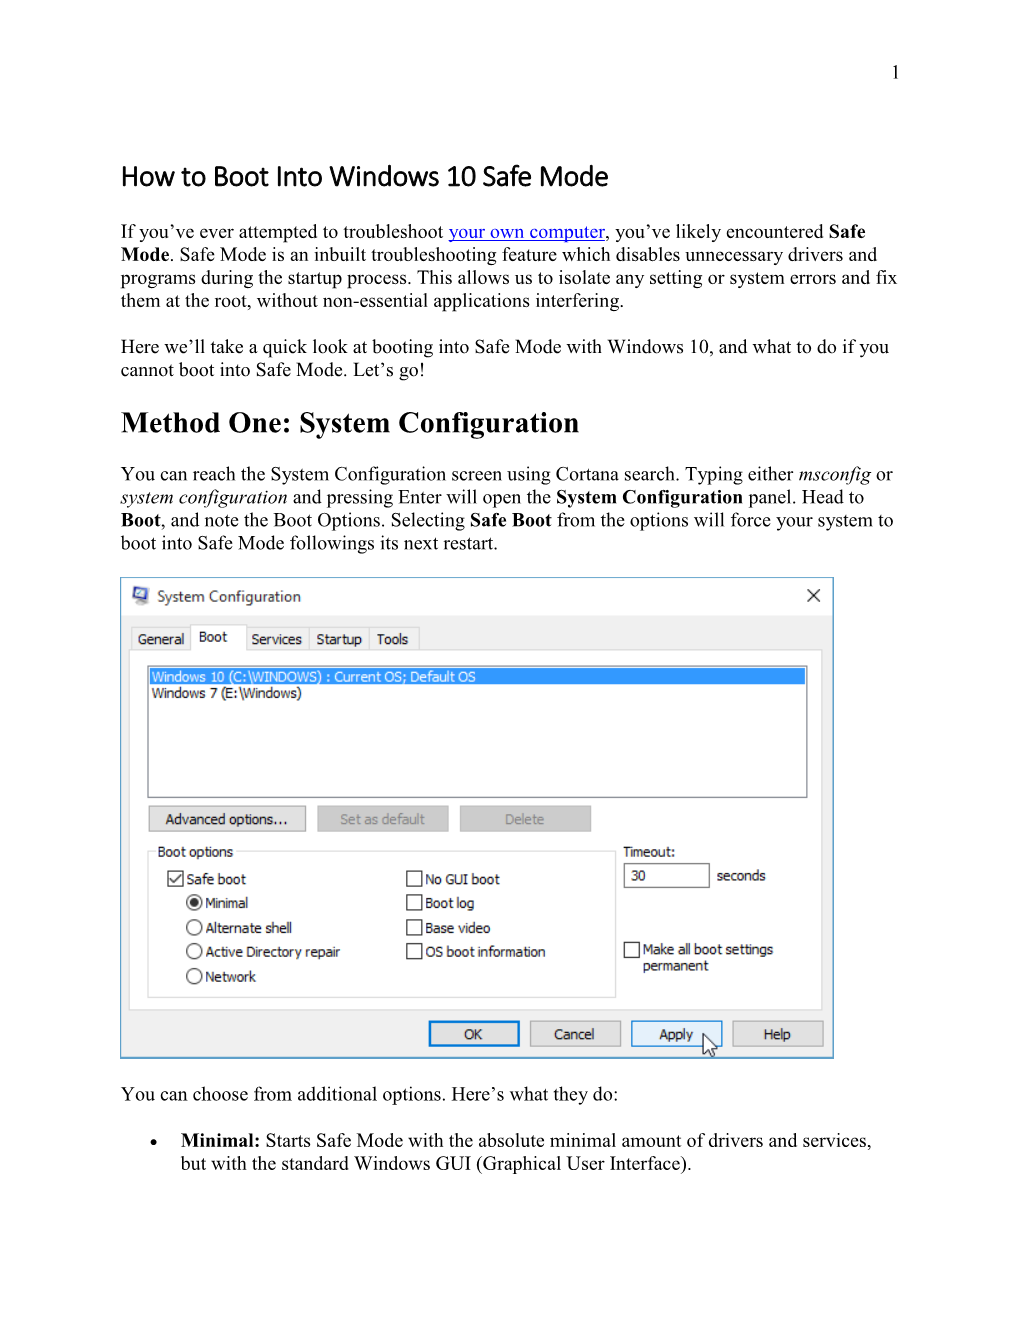 How to Boot Into Windows 10 Safe Mode Method